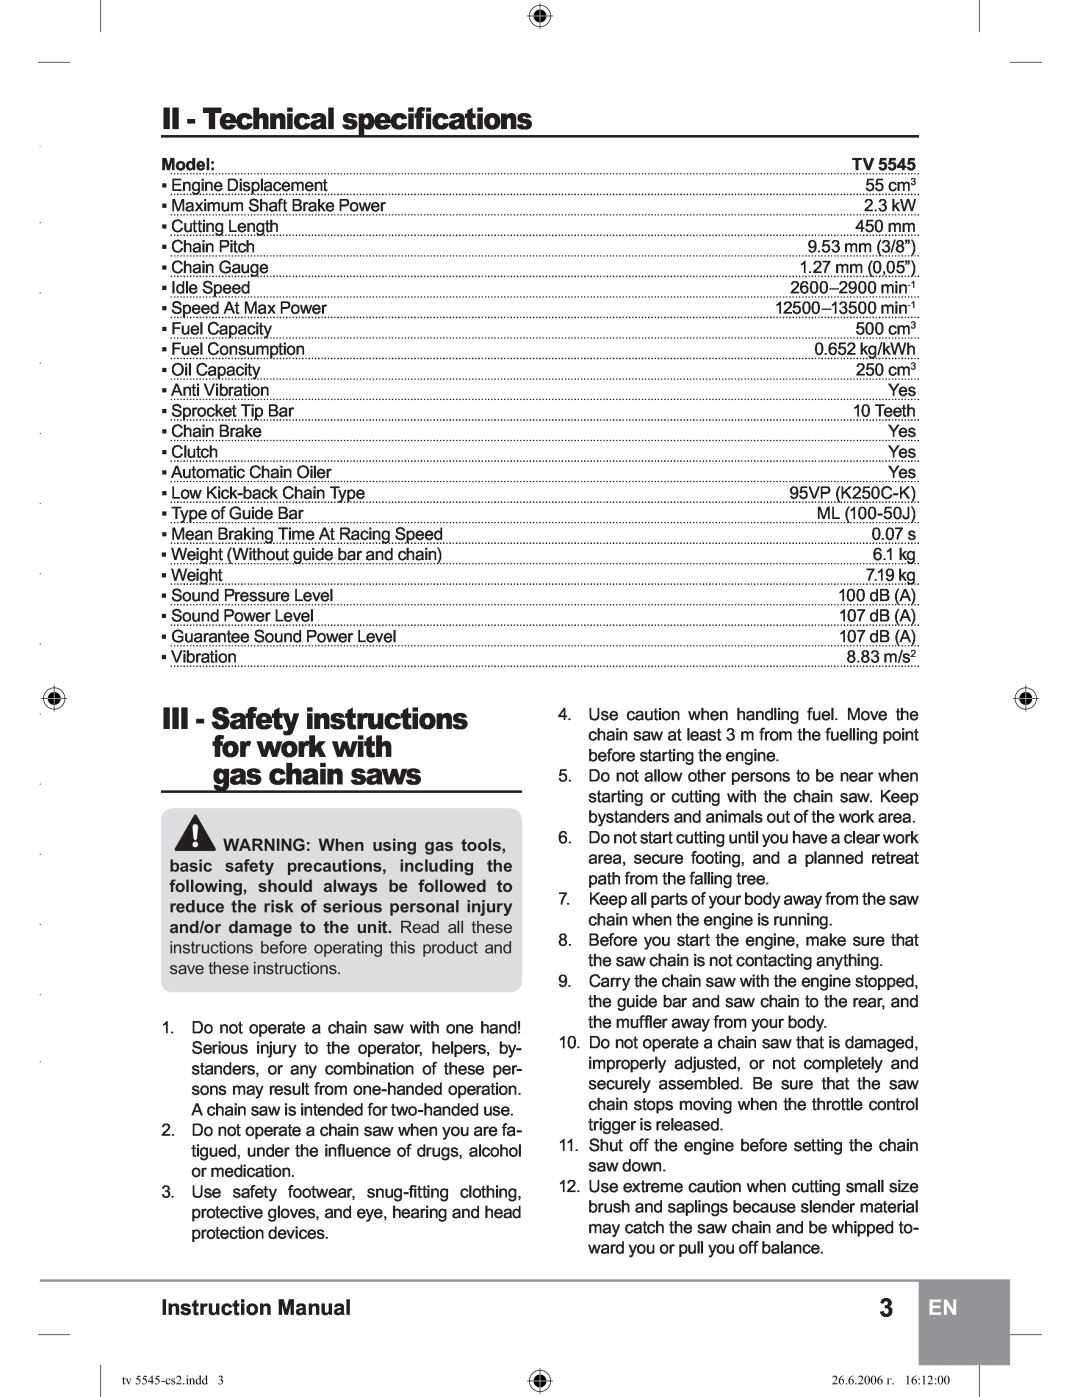 Sparky Group TV 5545 manual 7HFKQLFDOVSHFLÀFDWLRQV, III - Safety instructions for work with gas chain saws 